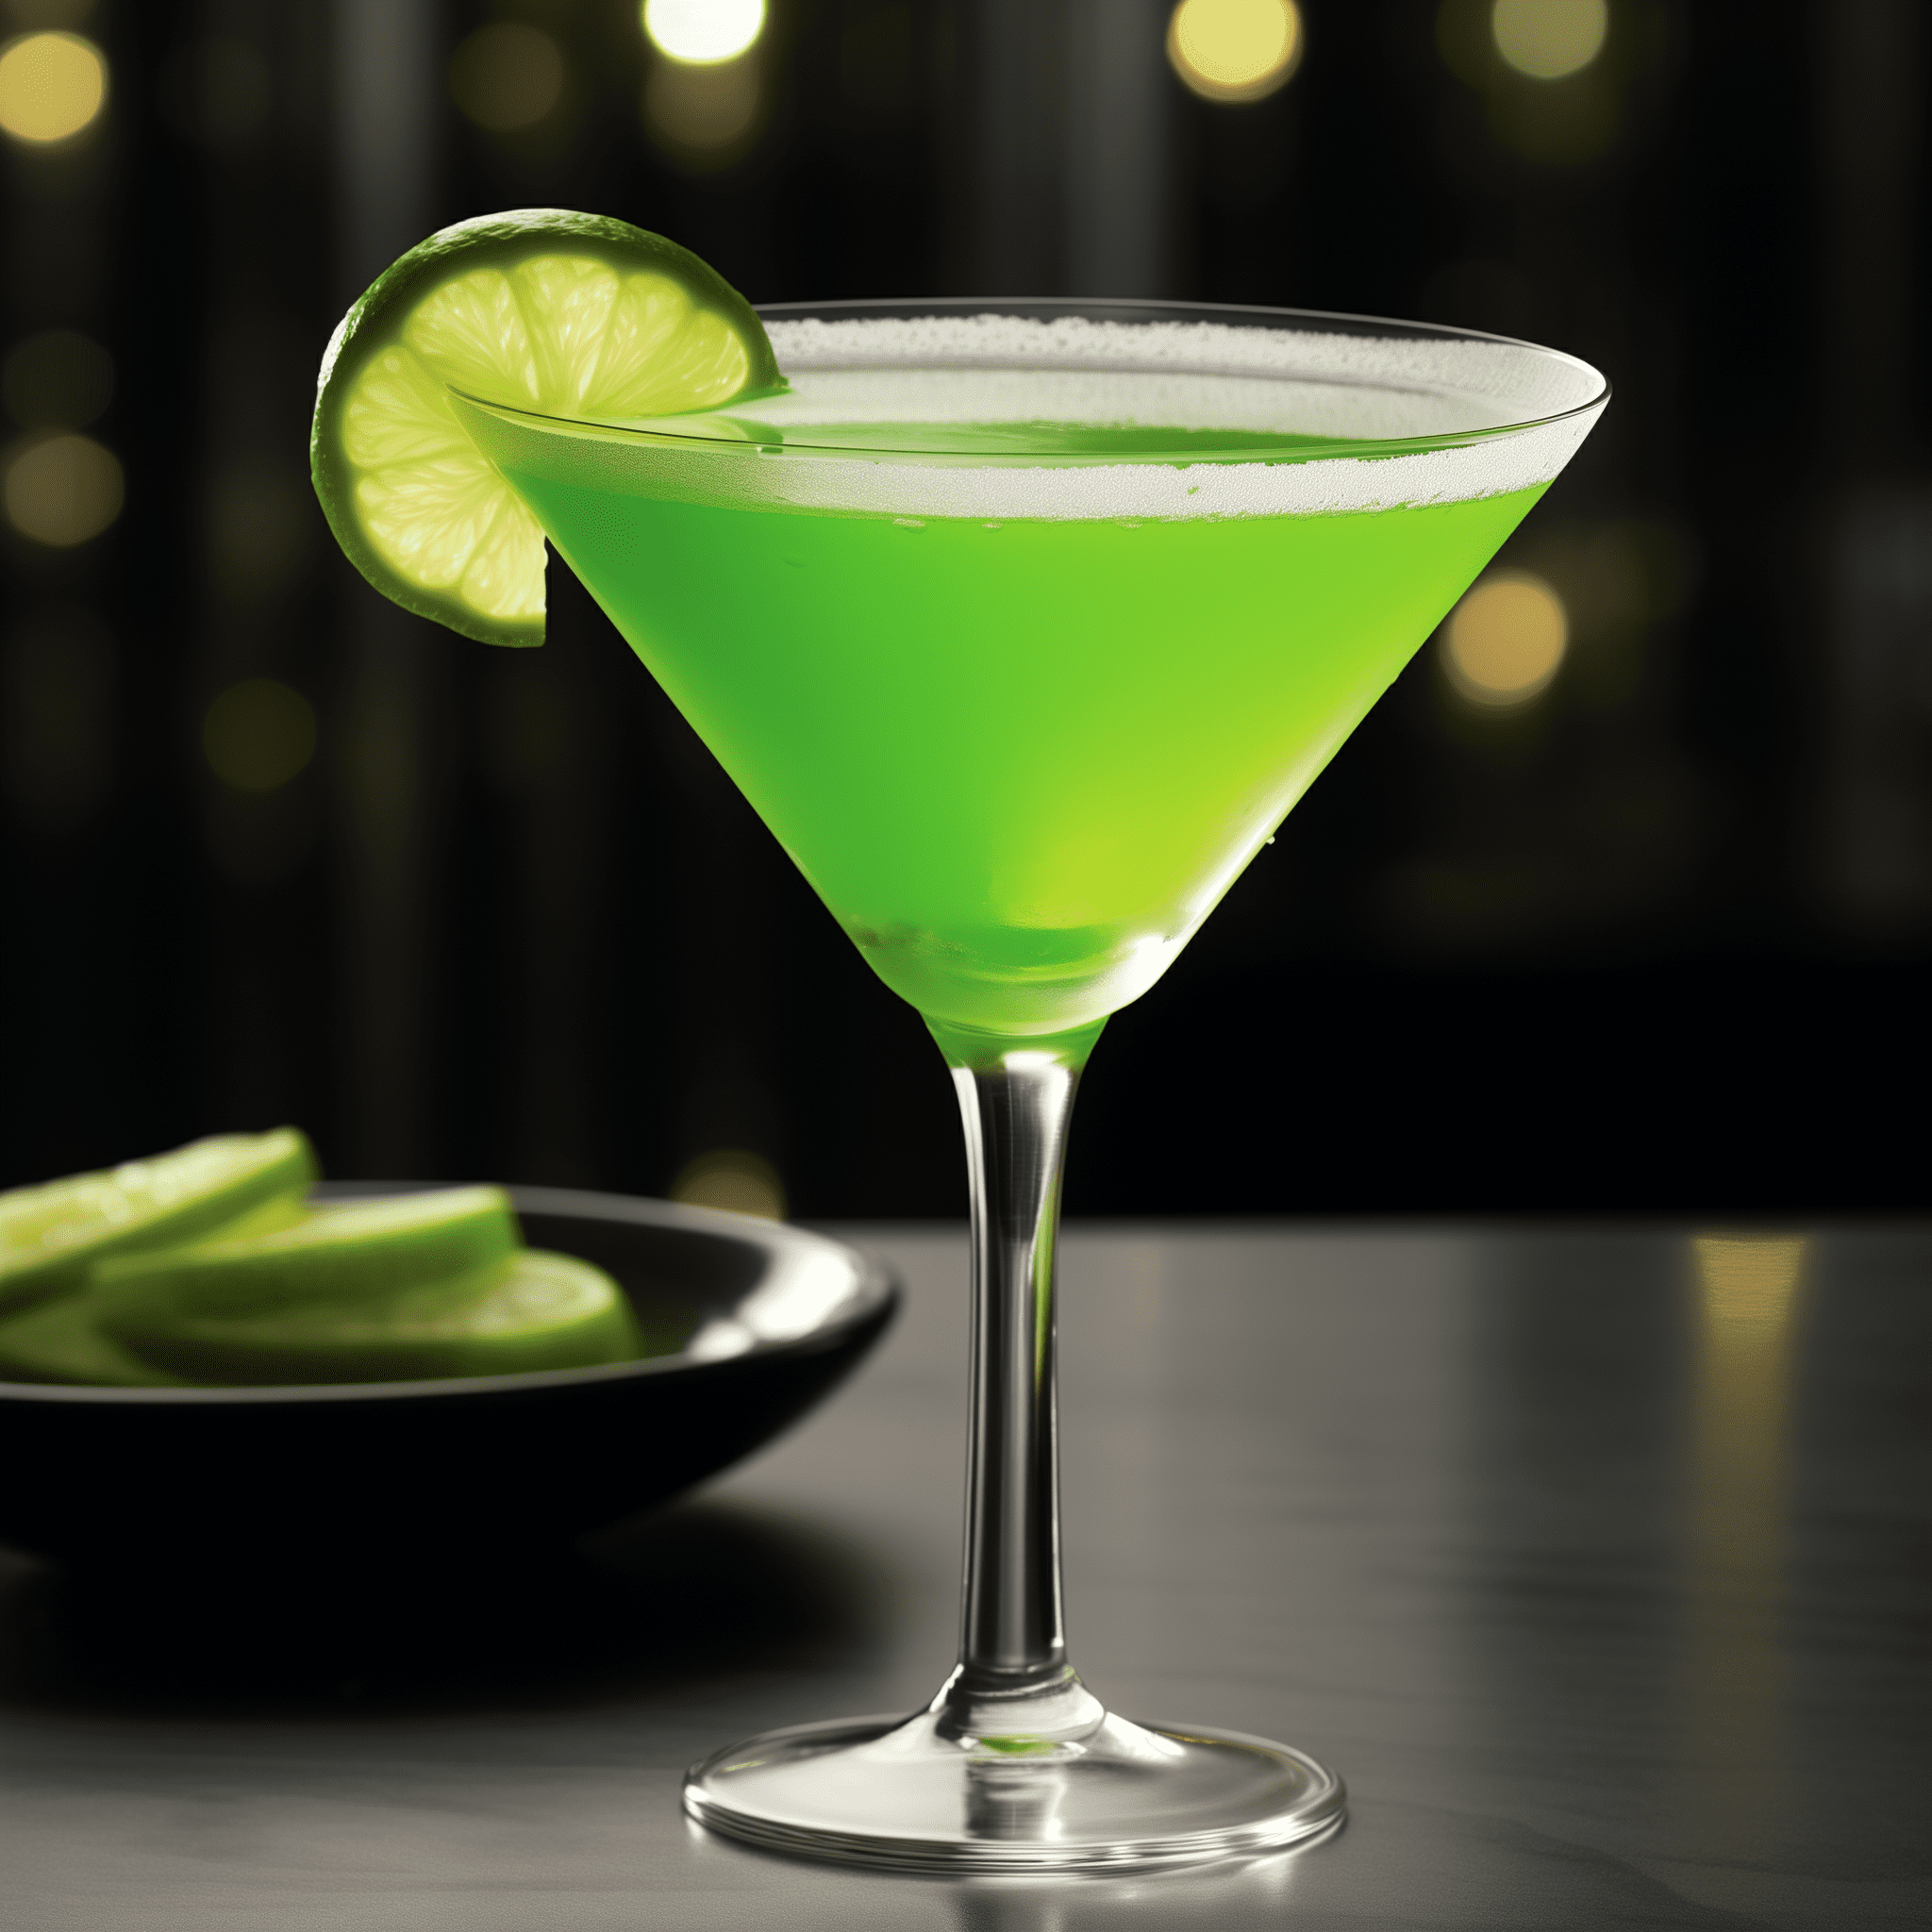 Green Frog Cocktail Recipe - The Green Frog cocktail is a delightful mix of sweet and tangy flavors with a fruity punch. It's light on the palate with a playful melon note, thanks to the Midori, and finishes with a refreshing citrus kick.